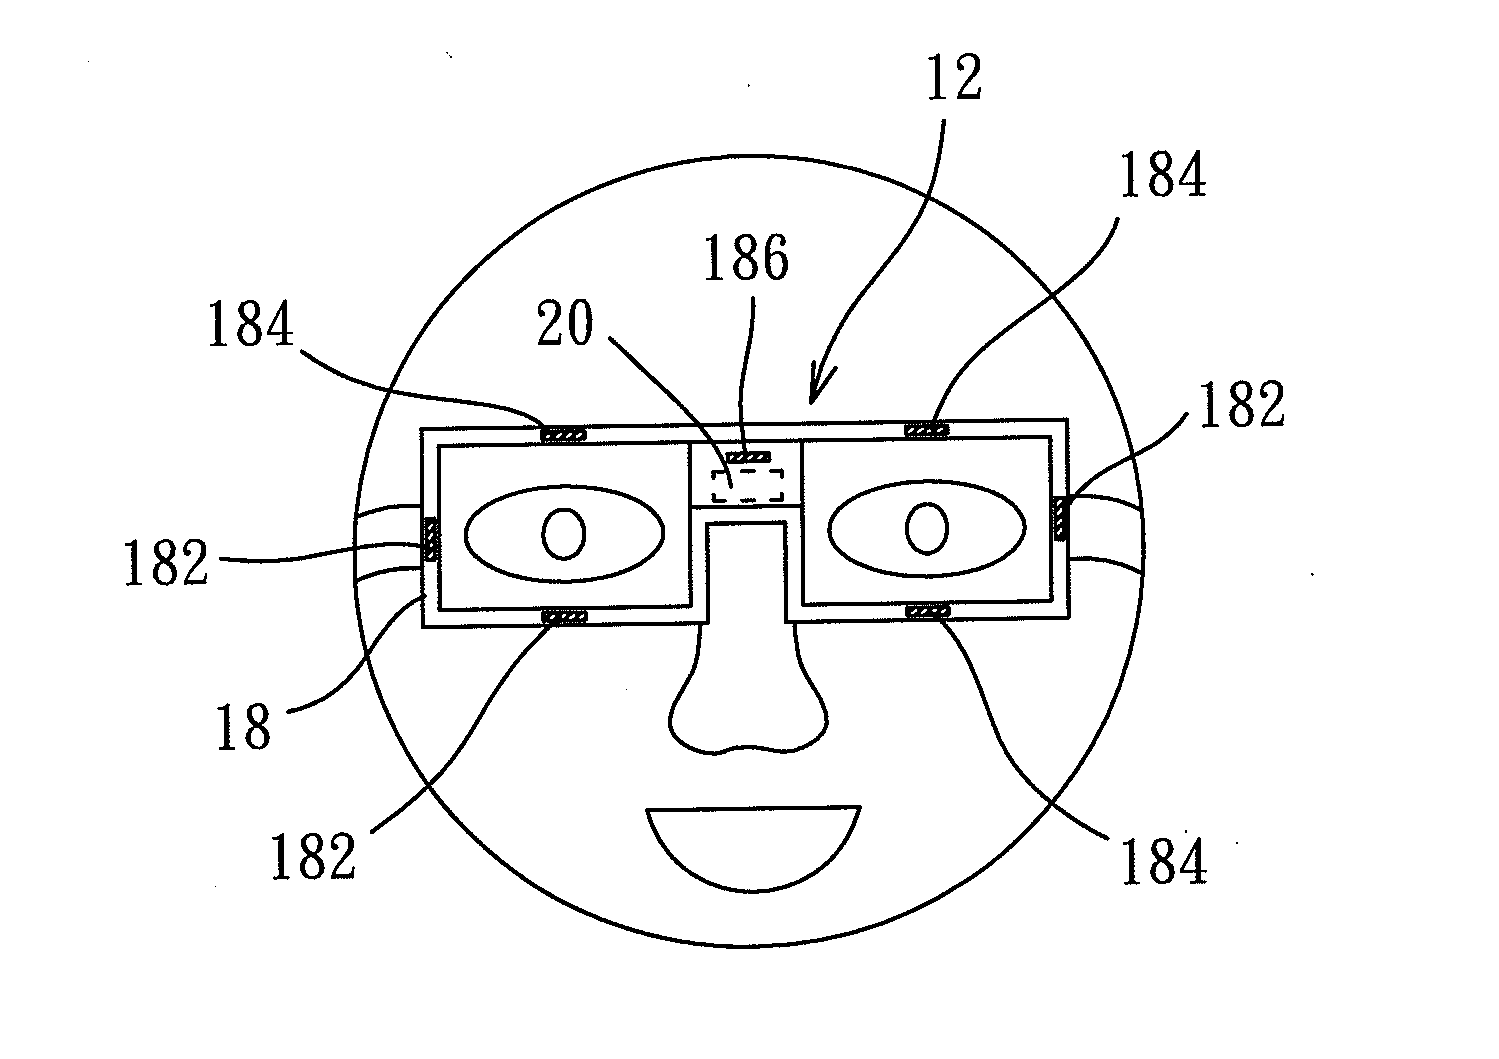 Image control system able to detect electrooculography